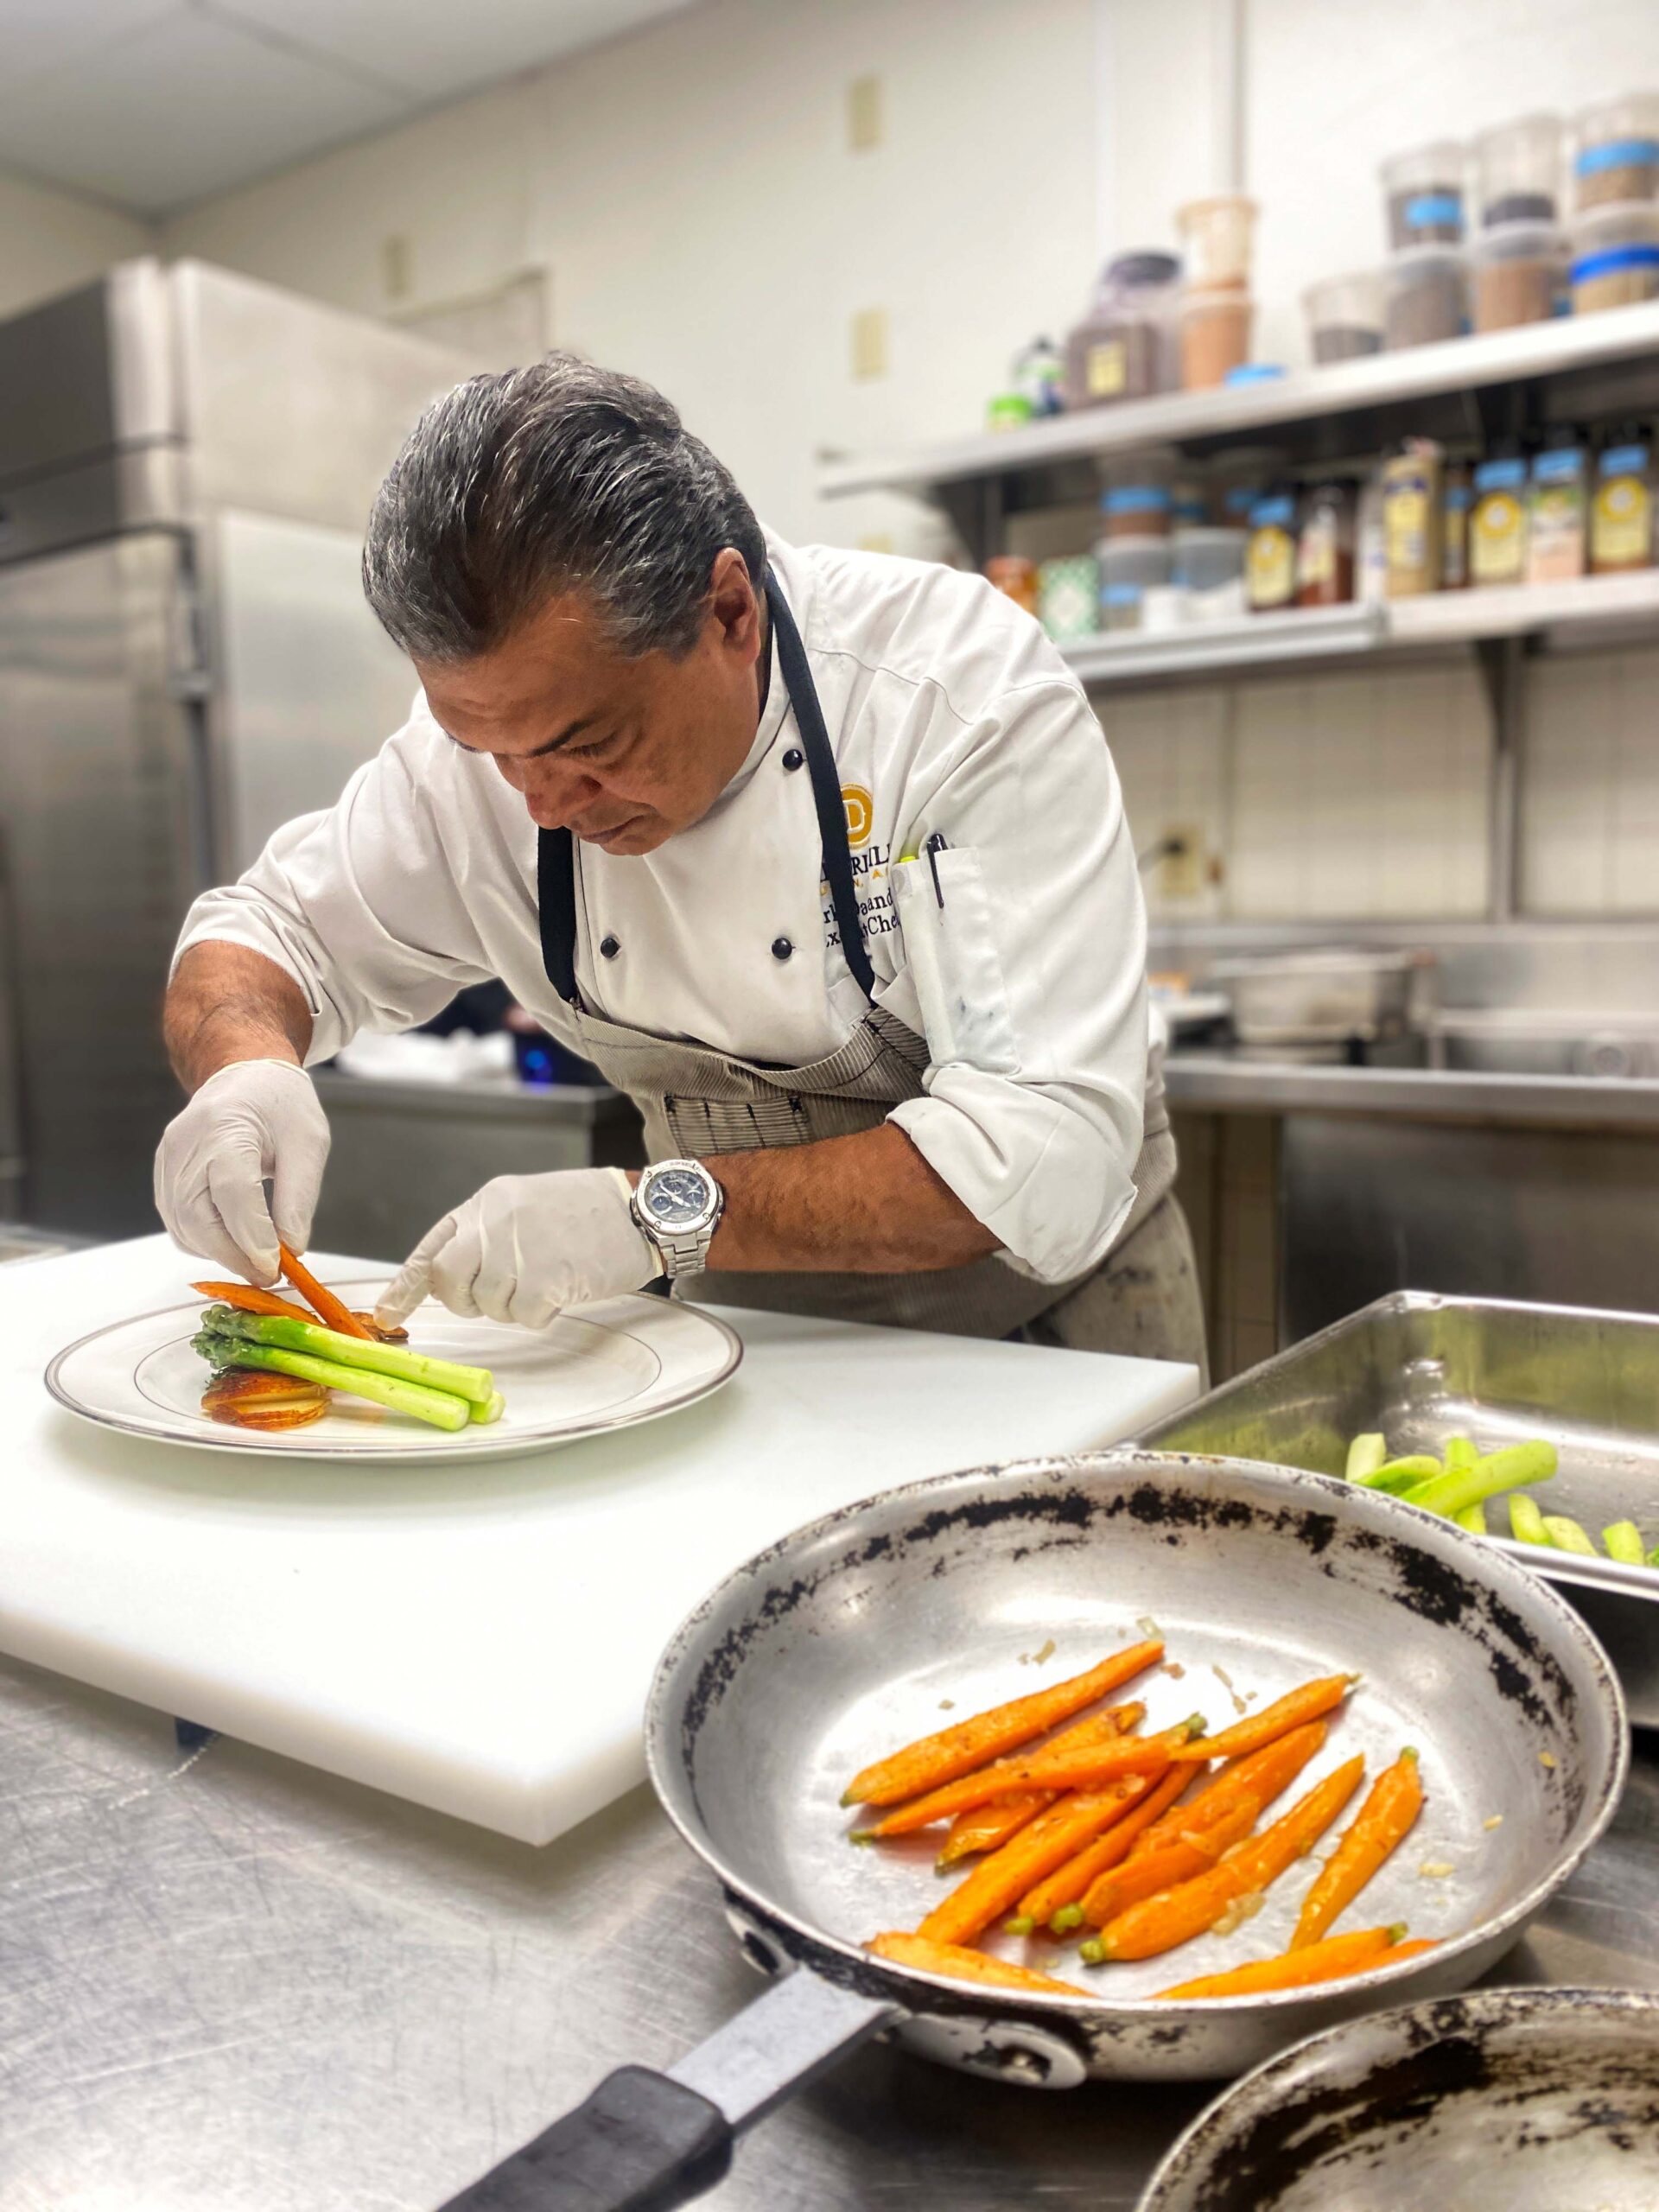 Chef Mark of The Driskill Hotel plating carrots and asparagus in the kitchen.